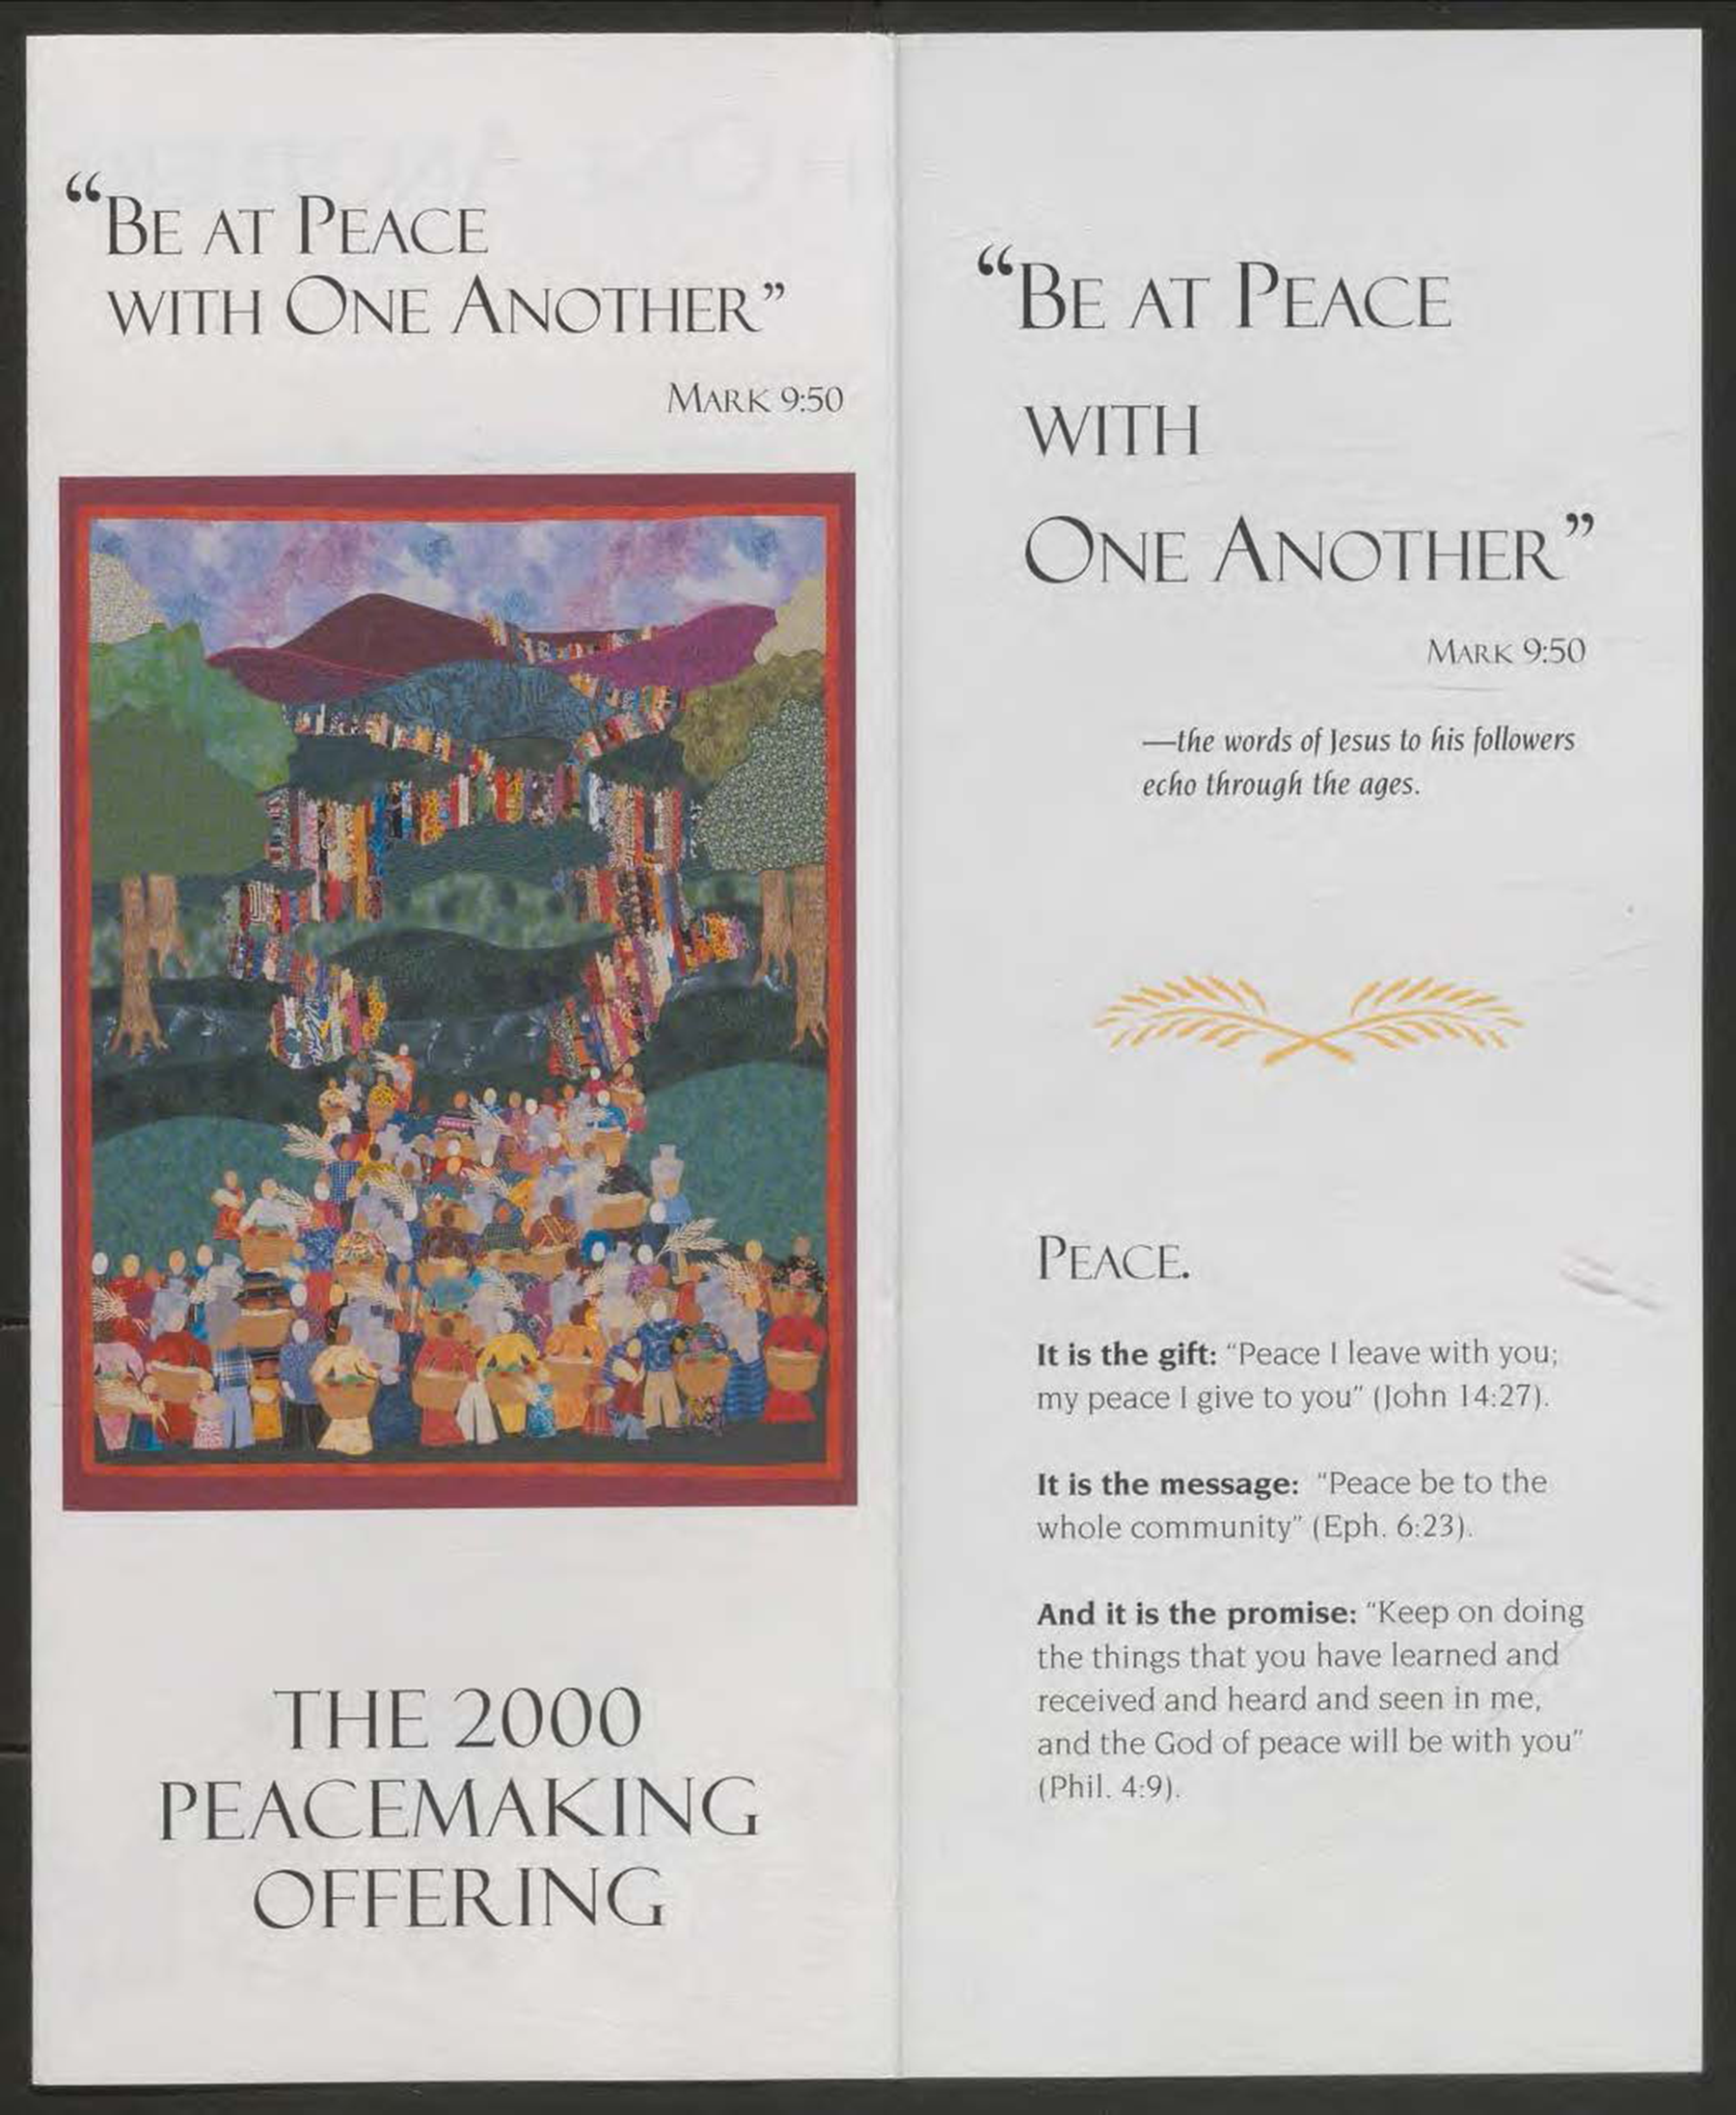 Front cover of brochure advertising the 2000 Peacemaking Offering. From Pearl: 348244 [RG 542, Box 28, Folder 1]